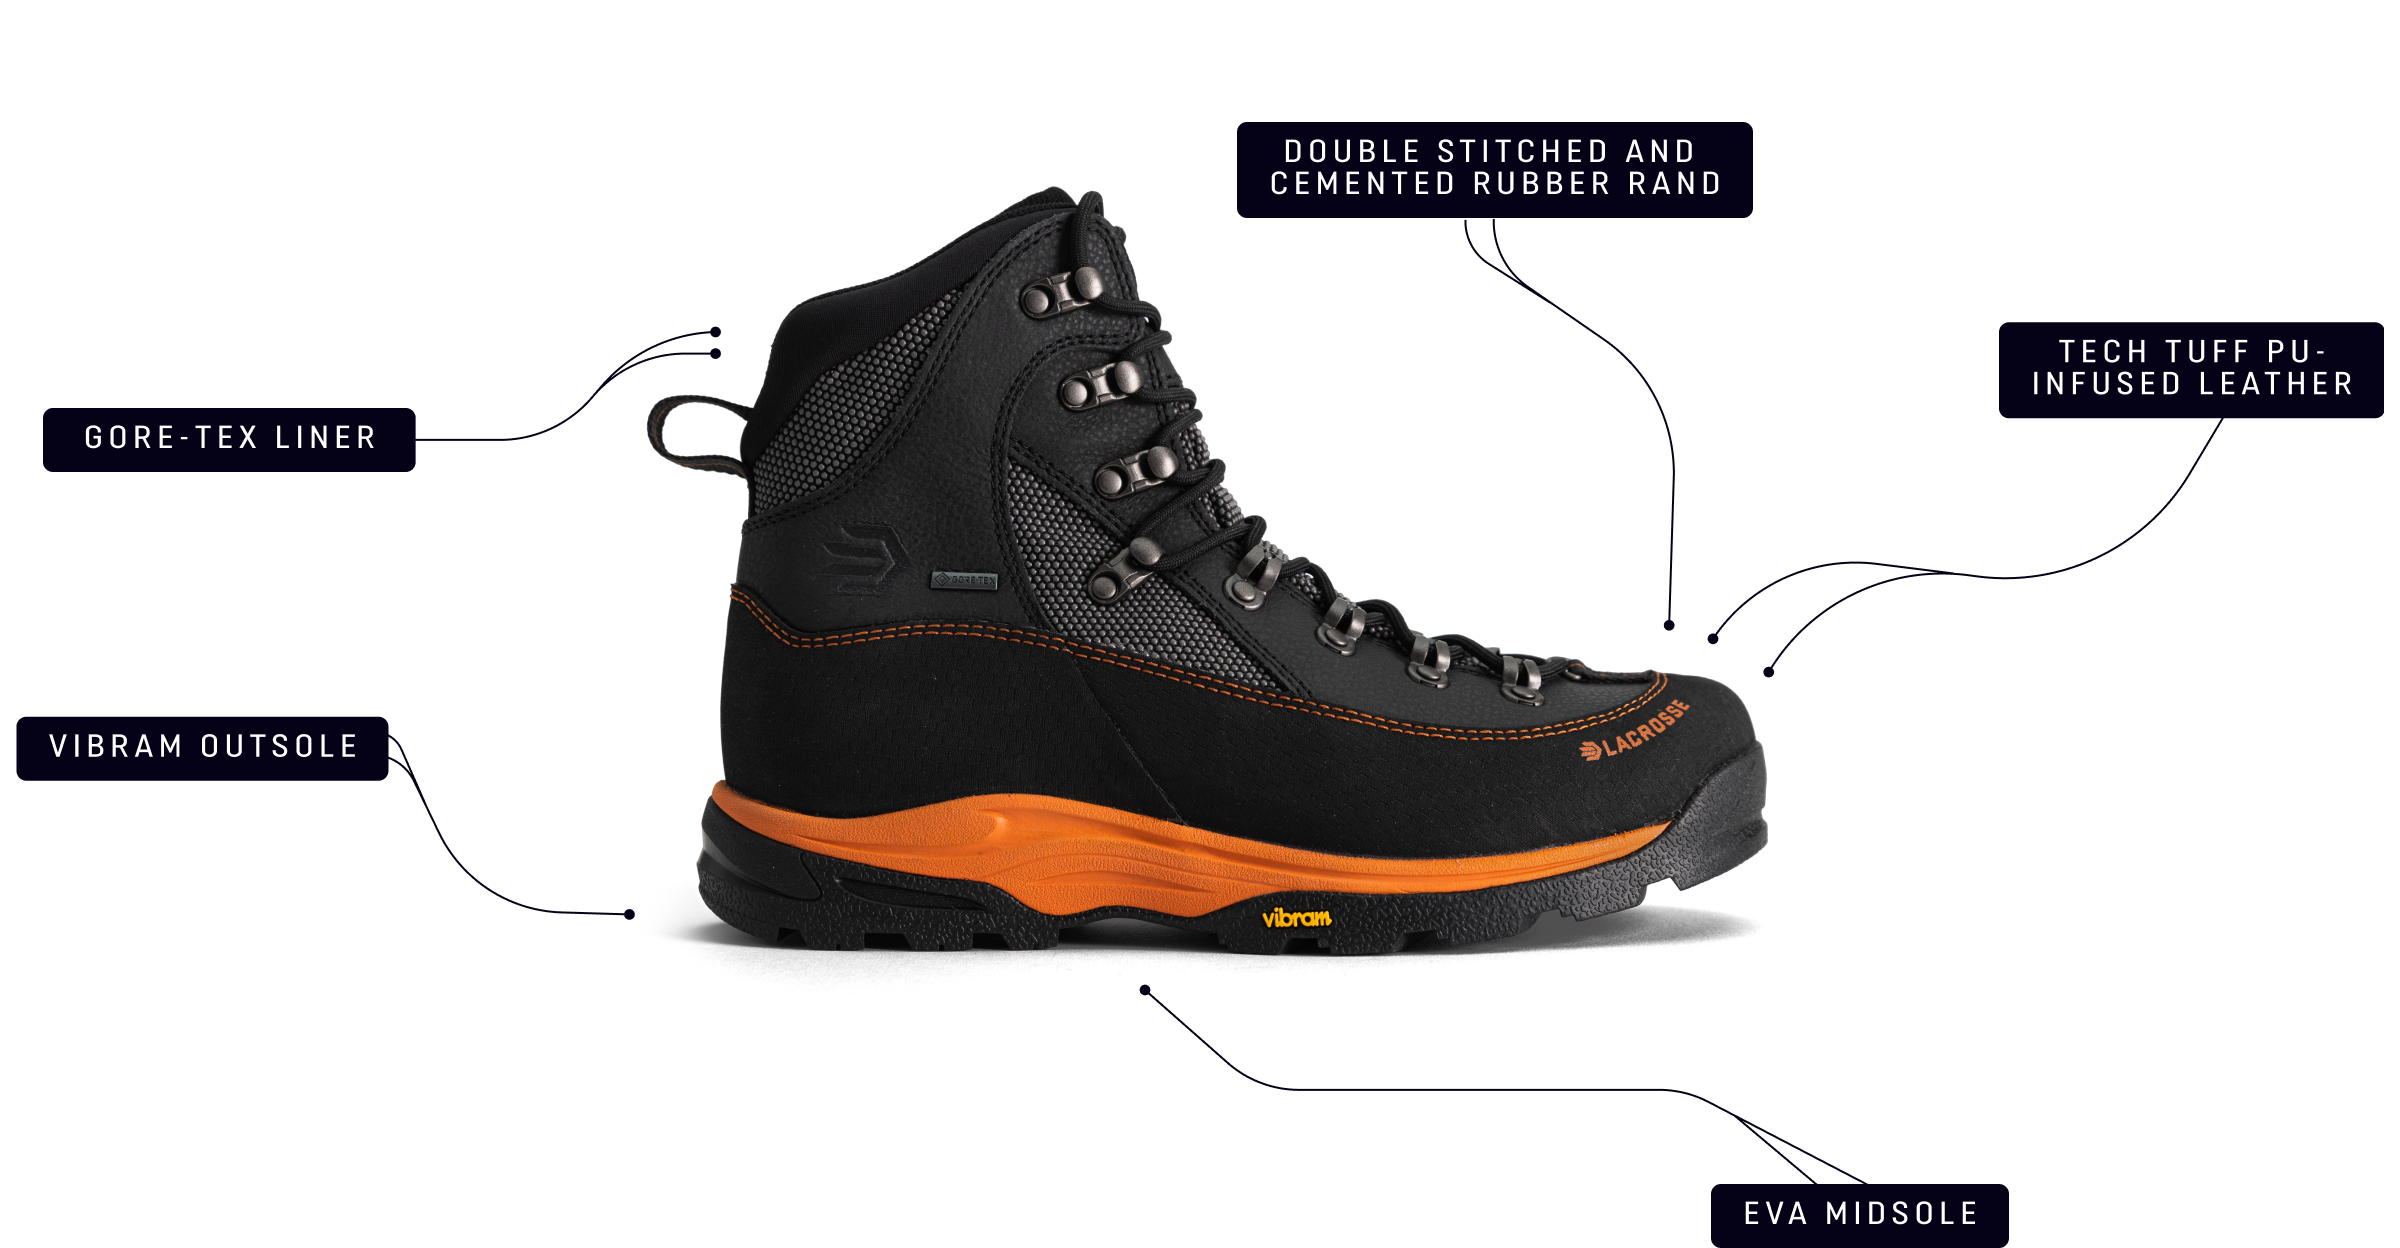 Ursa boot image, Gore-text liner, Vibram Outsole, Double Stitched and Cemented Rubber Rand, Eva Midsole, and Tech Tuff PU-Infused Leather